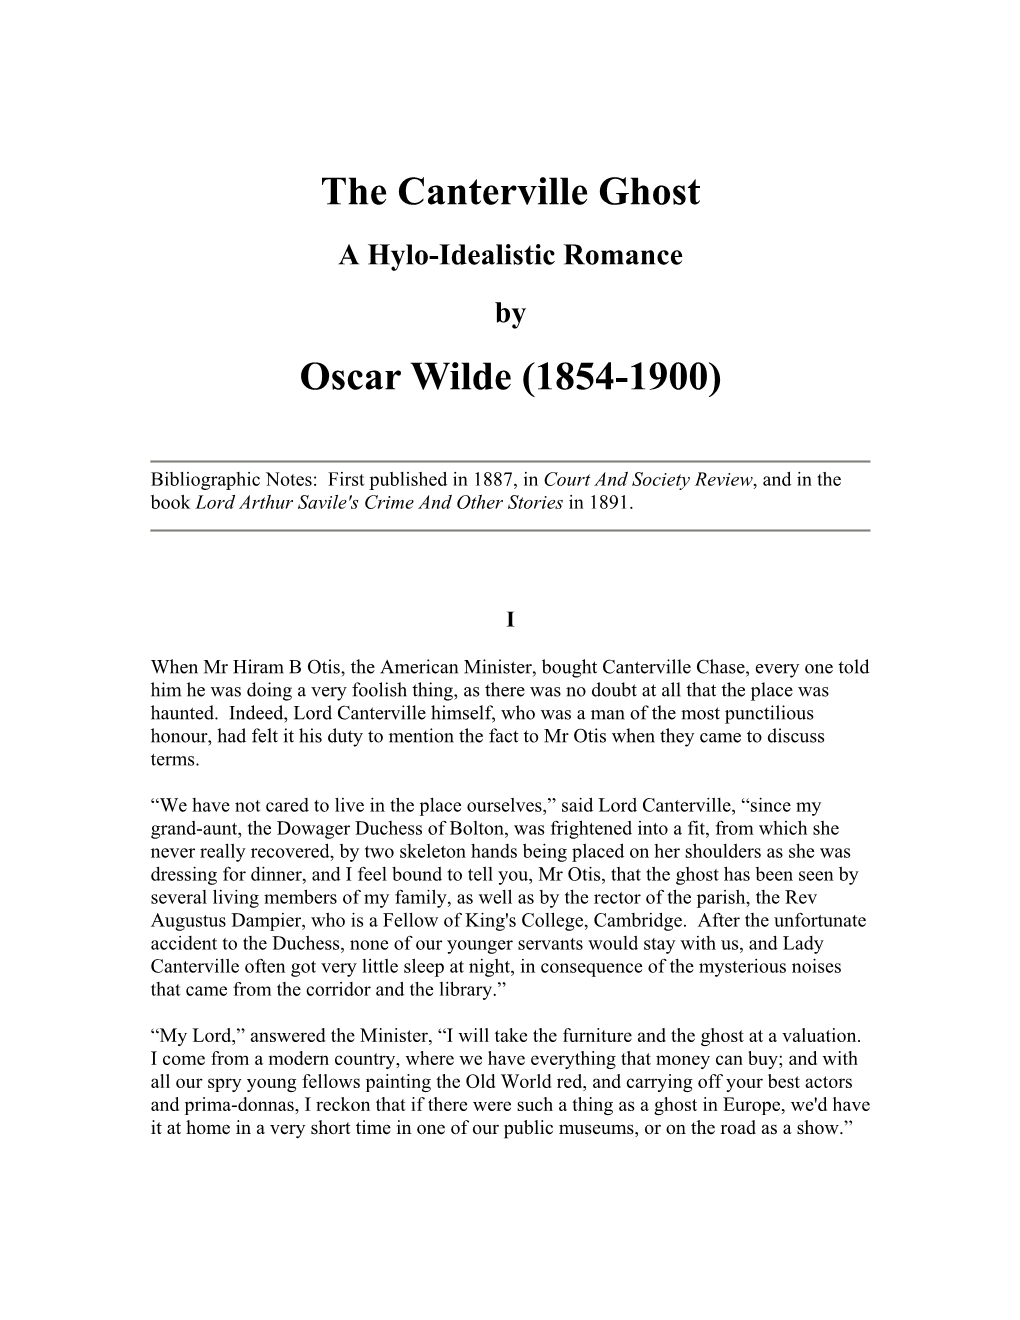 The Canterville Ghost a Hylo-Idealistic Romance by Oscar Wilde (1854-1900)